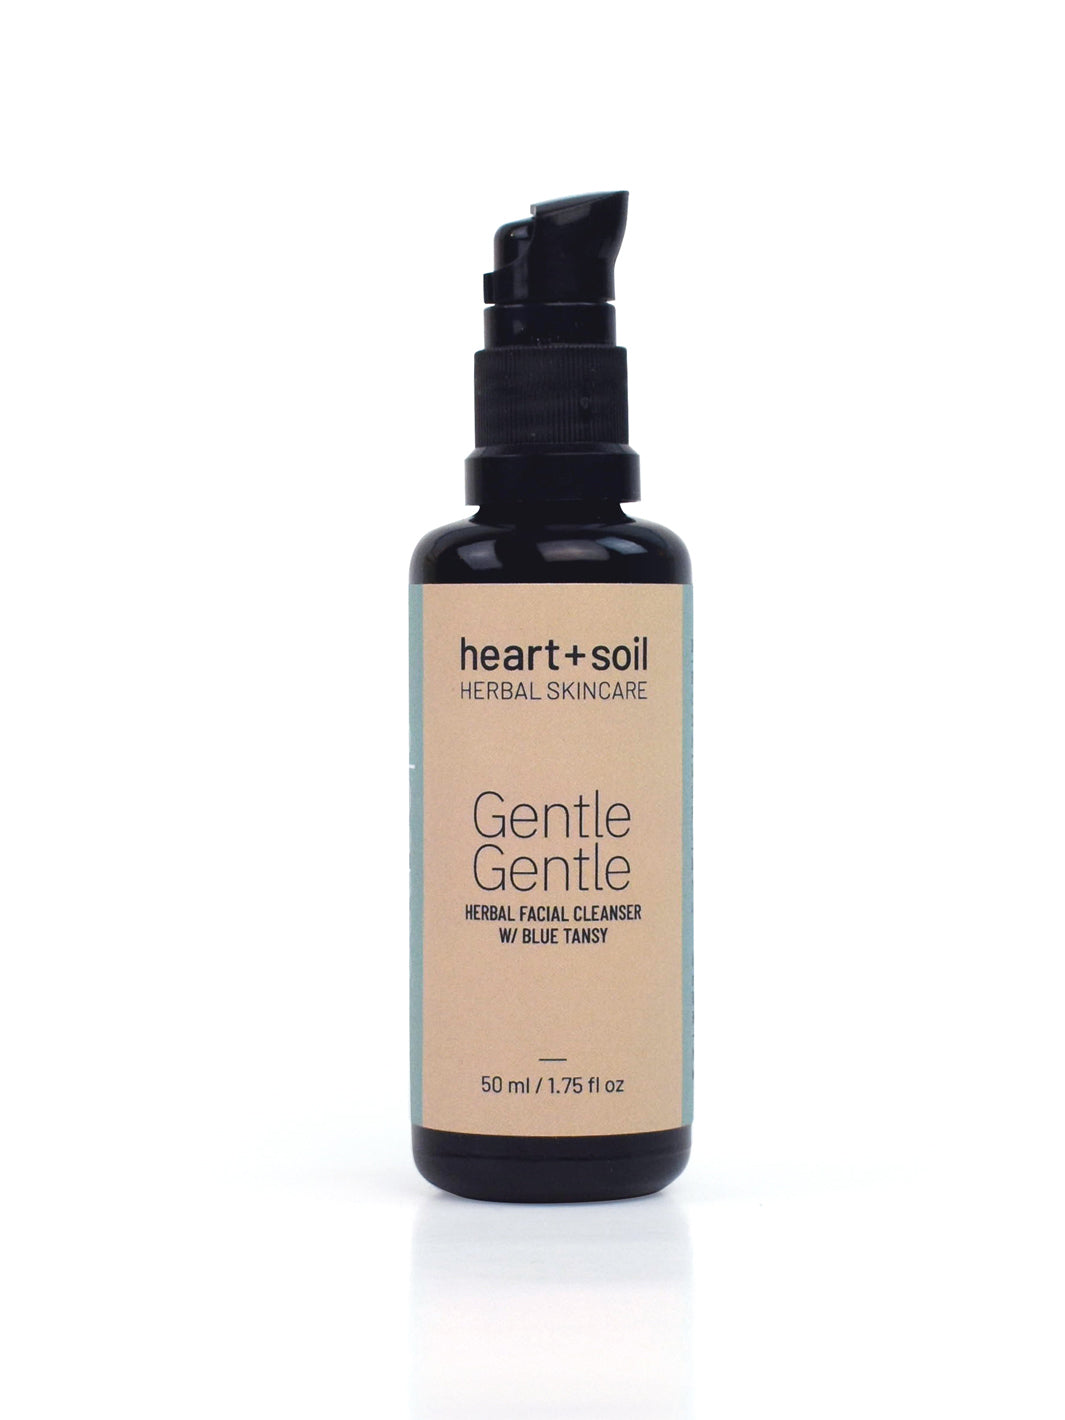 Gentle Gentle Herbal Facial Cleanser w/ Blue Tansy (50ml)